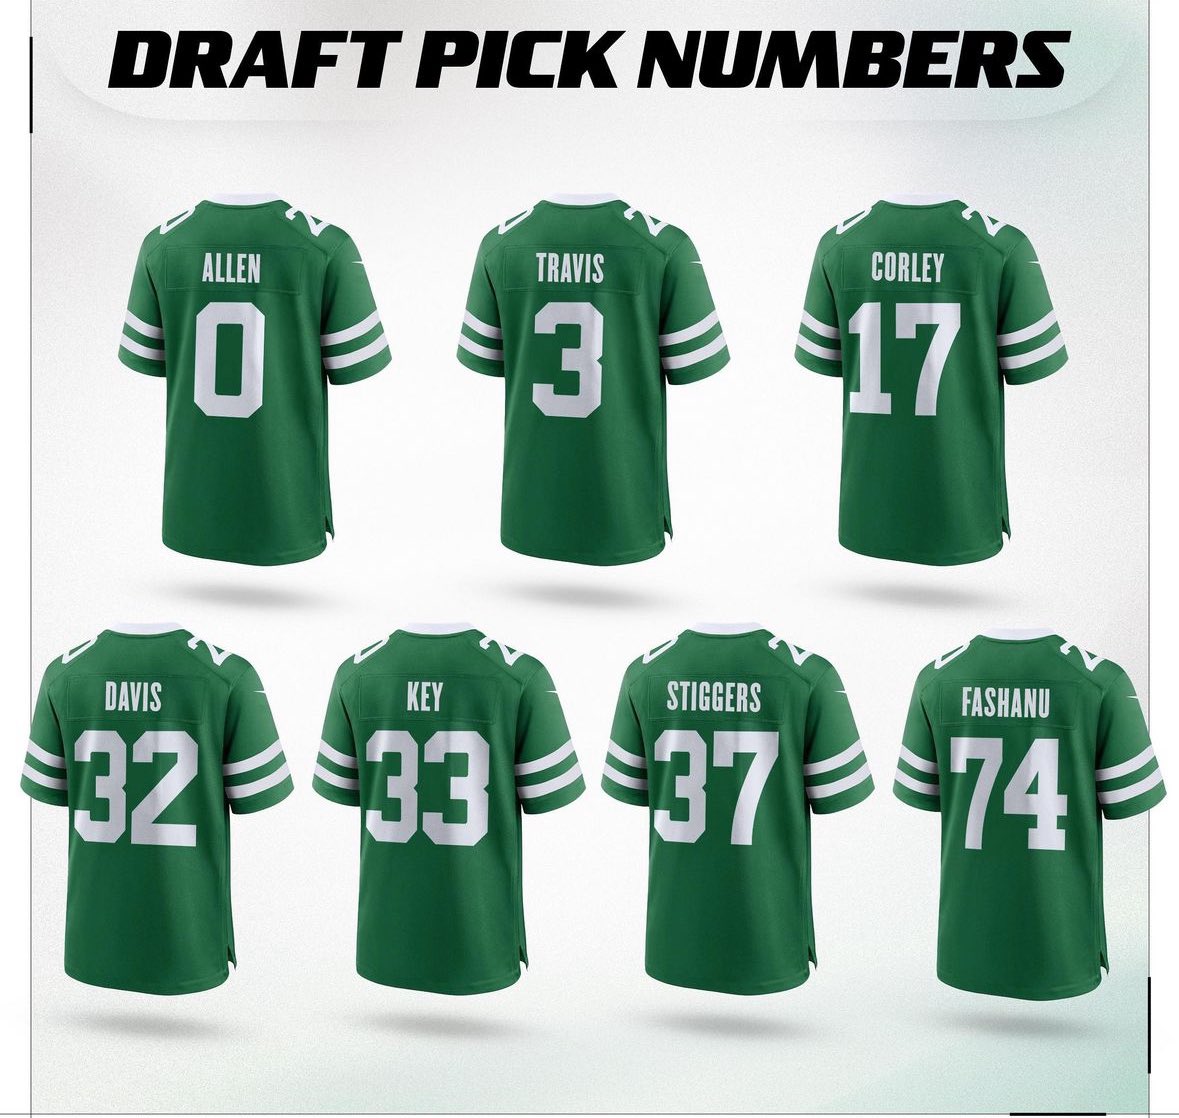 The draft pick numbers for the @nyjets #uniswag